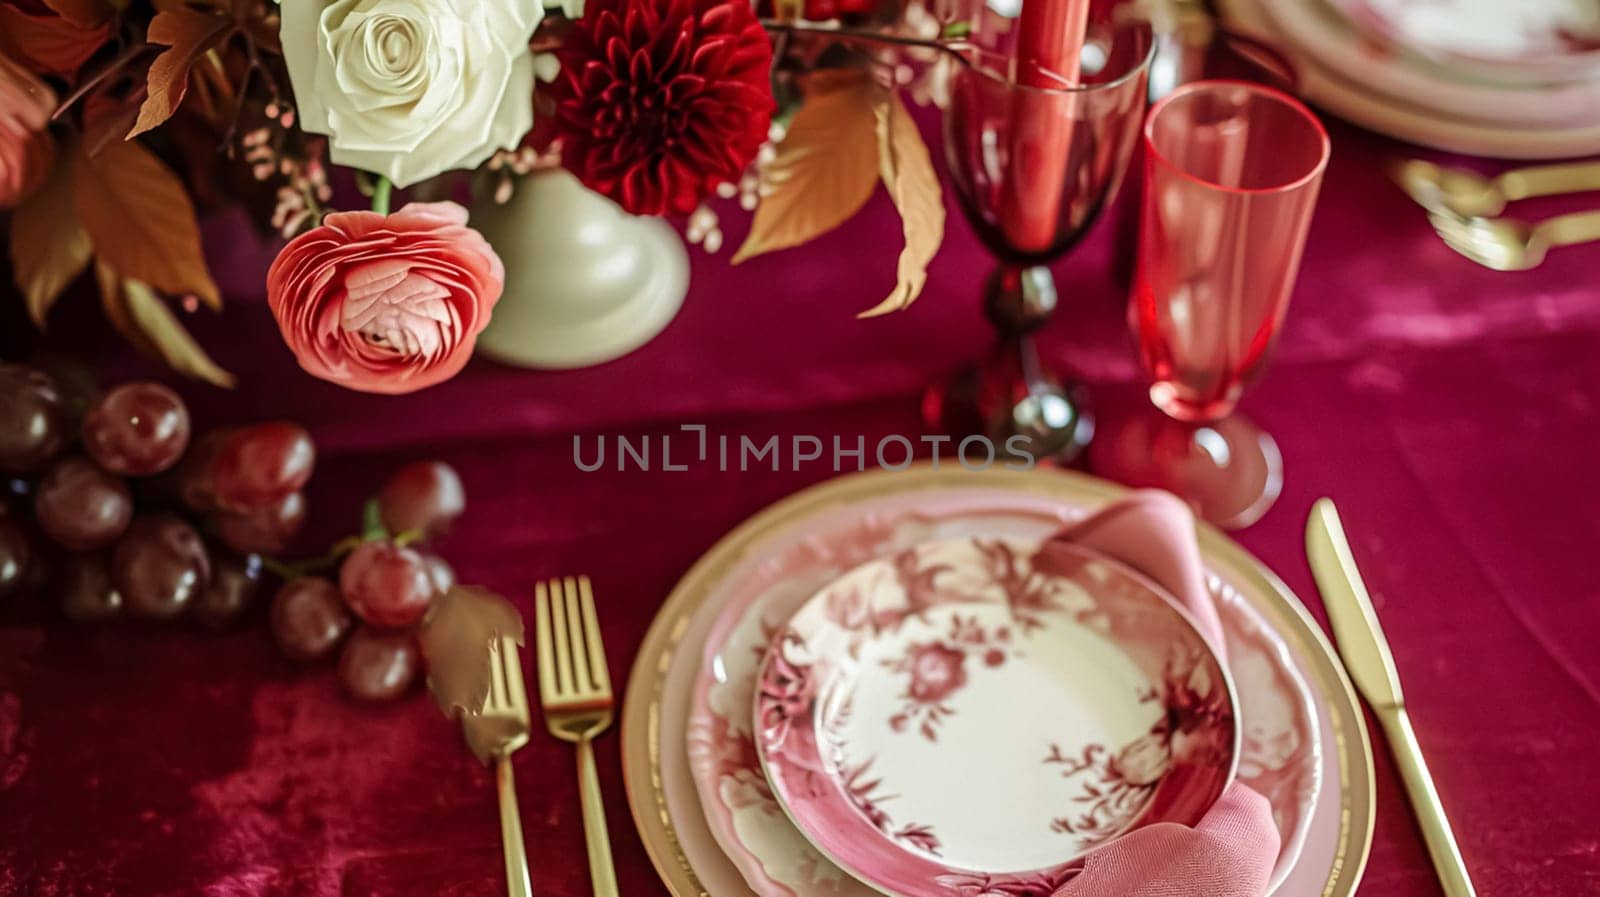 Valentines day tablescape and table decor, romantic table setting with flowers, formal dinner and date, beautiful cutlery and tableware by Anneleven